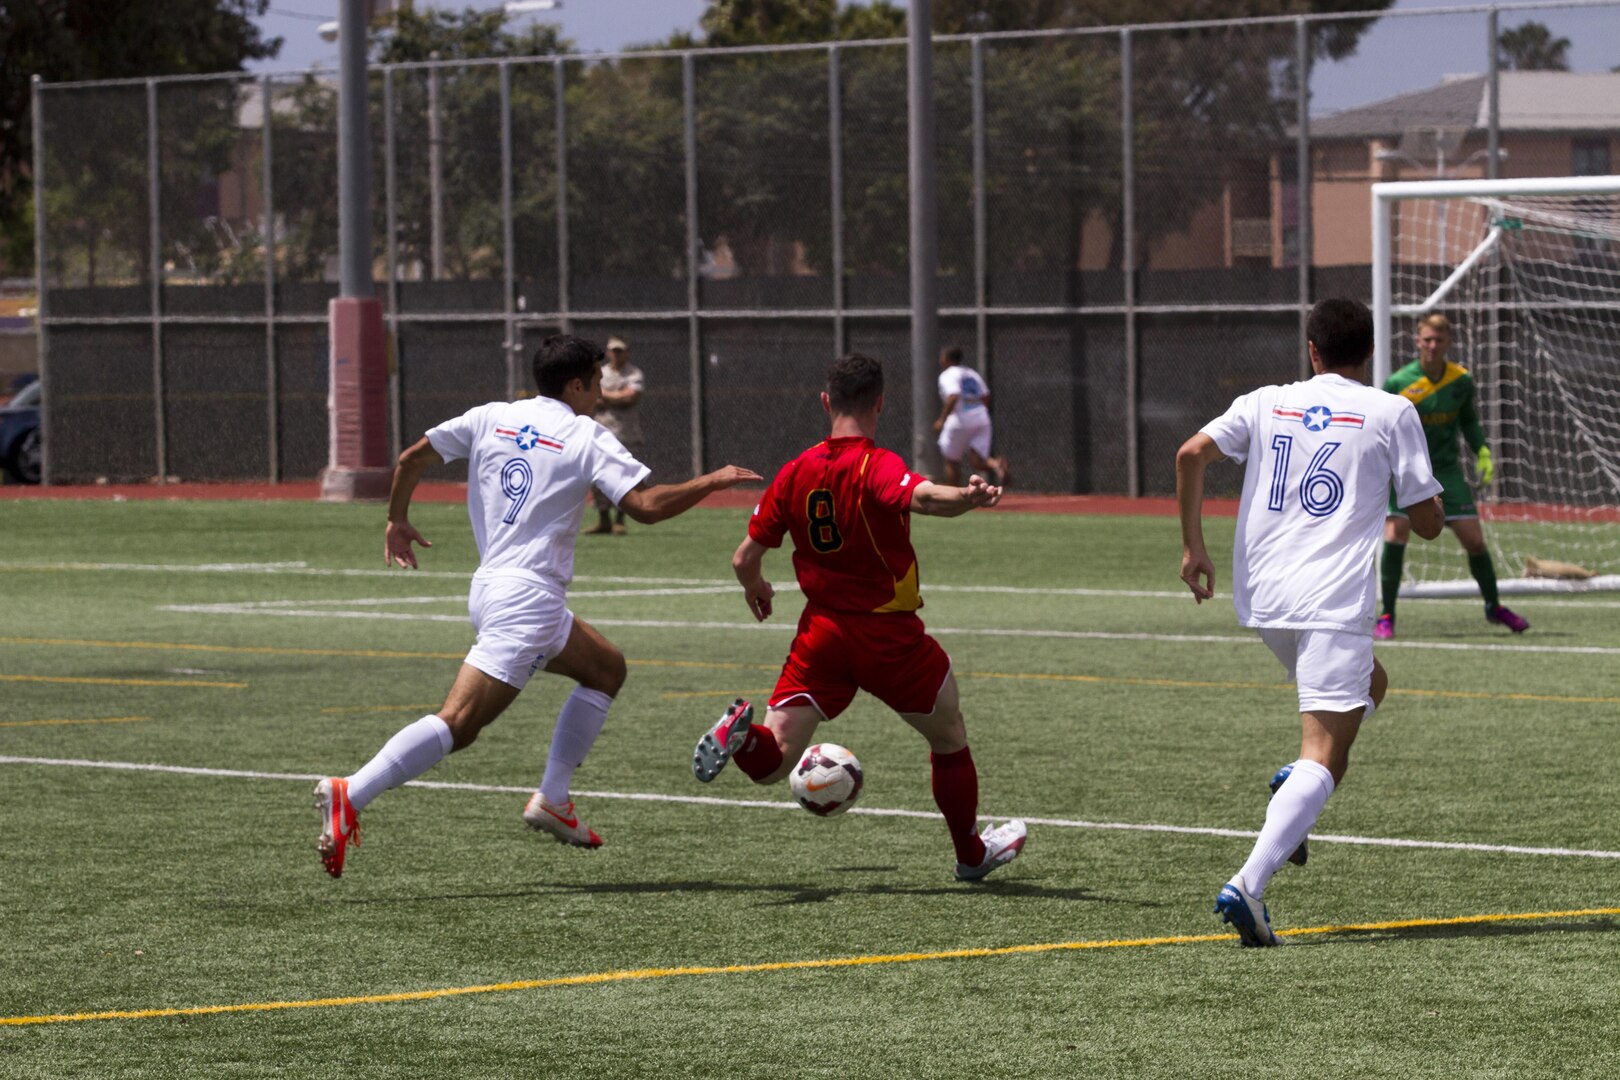 An All-Marine soccer player defends against members of the Air Force soccer team May 18 during the 2015 Armed Forces Soccer Championship at Marine Corps Air Station Miramar, Calif. All teams were evenly matched prior to the day's game.